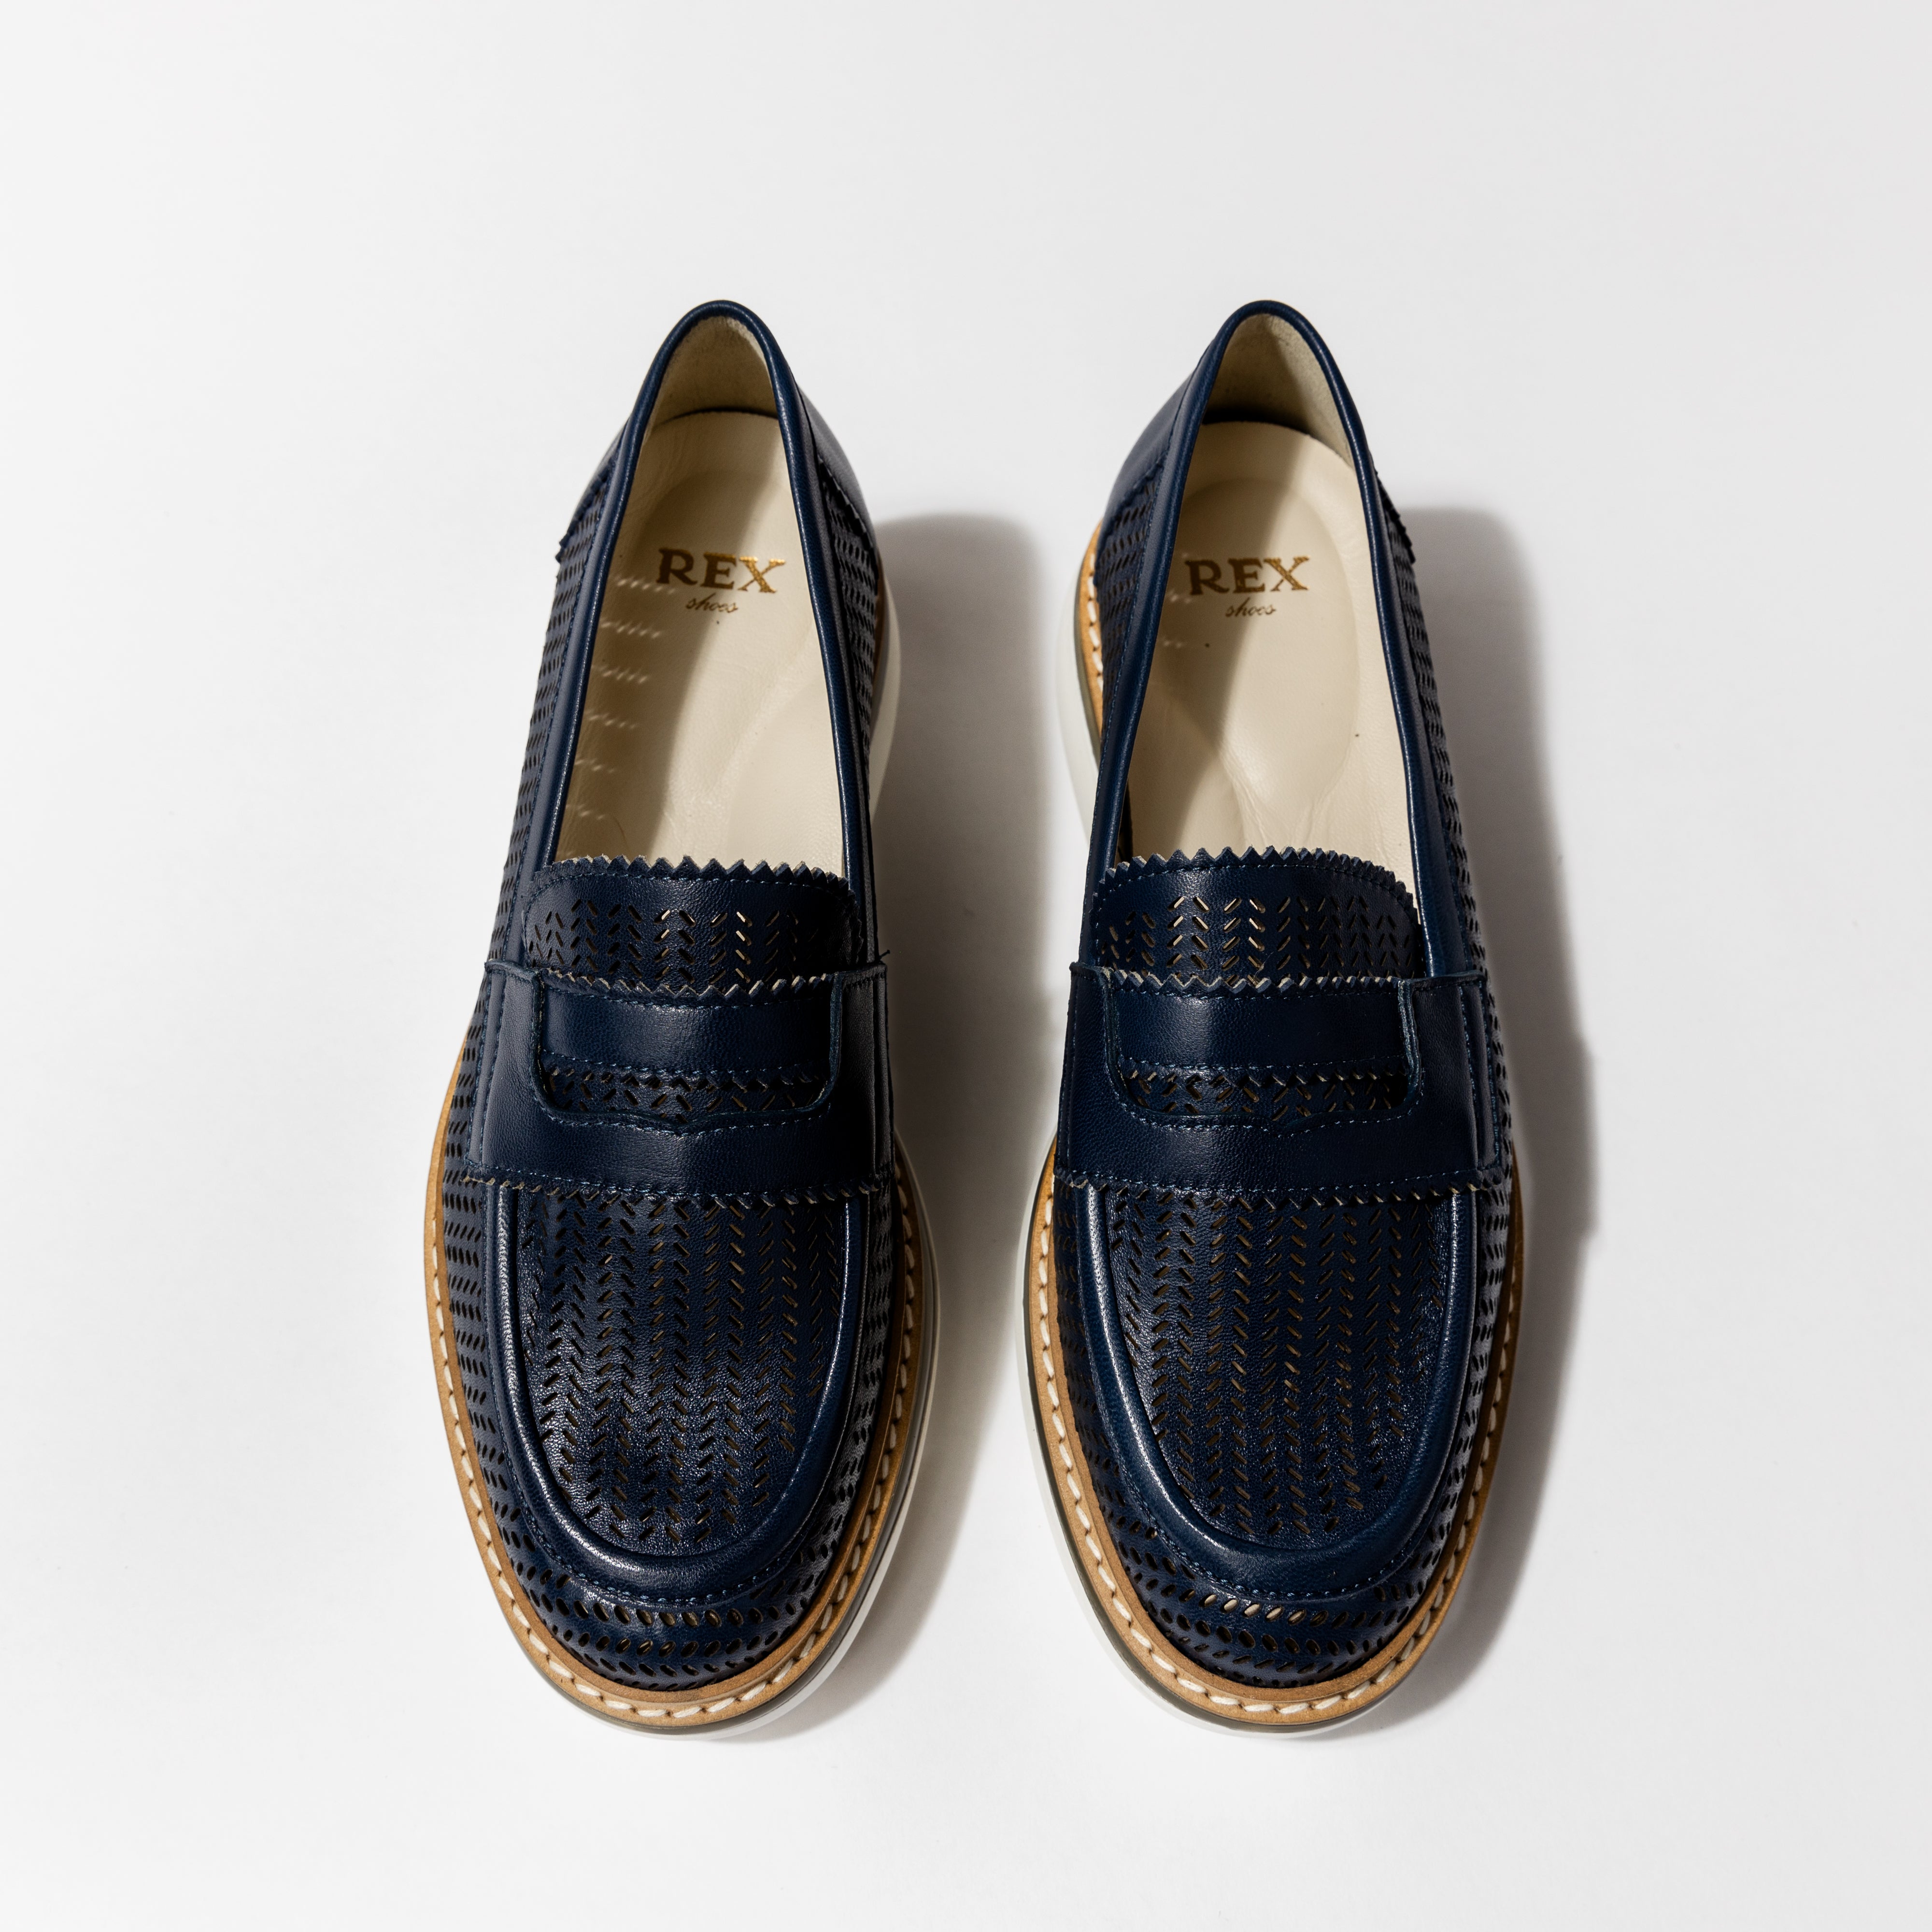 Top view of the 'Lauren' luxury loafers in Nuit Leather, featuring sleek black perforated design and timeless strap detail, crafted by Rex Shoes.